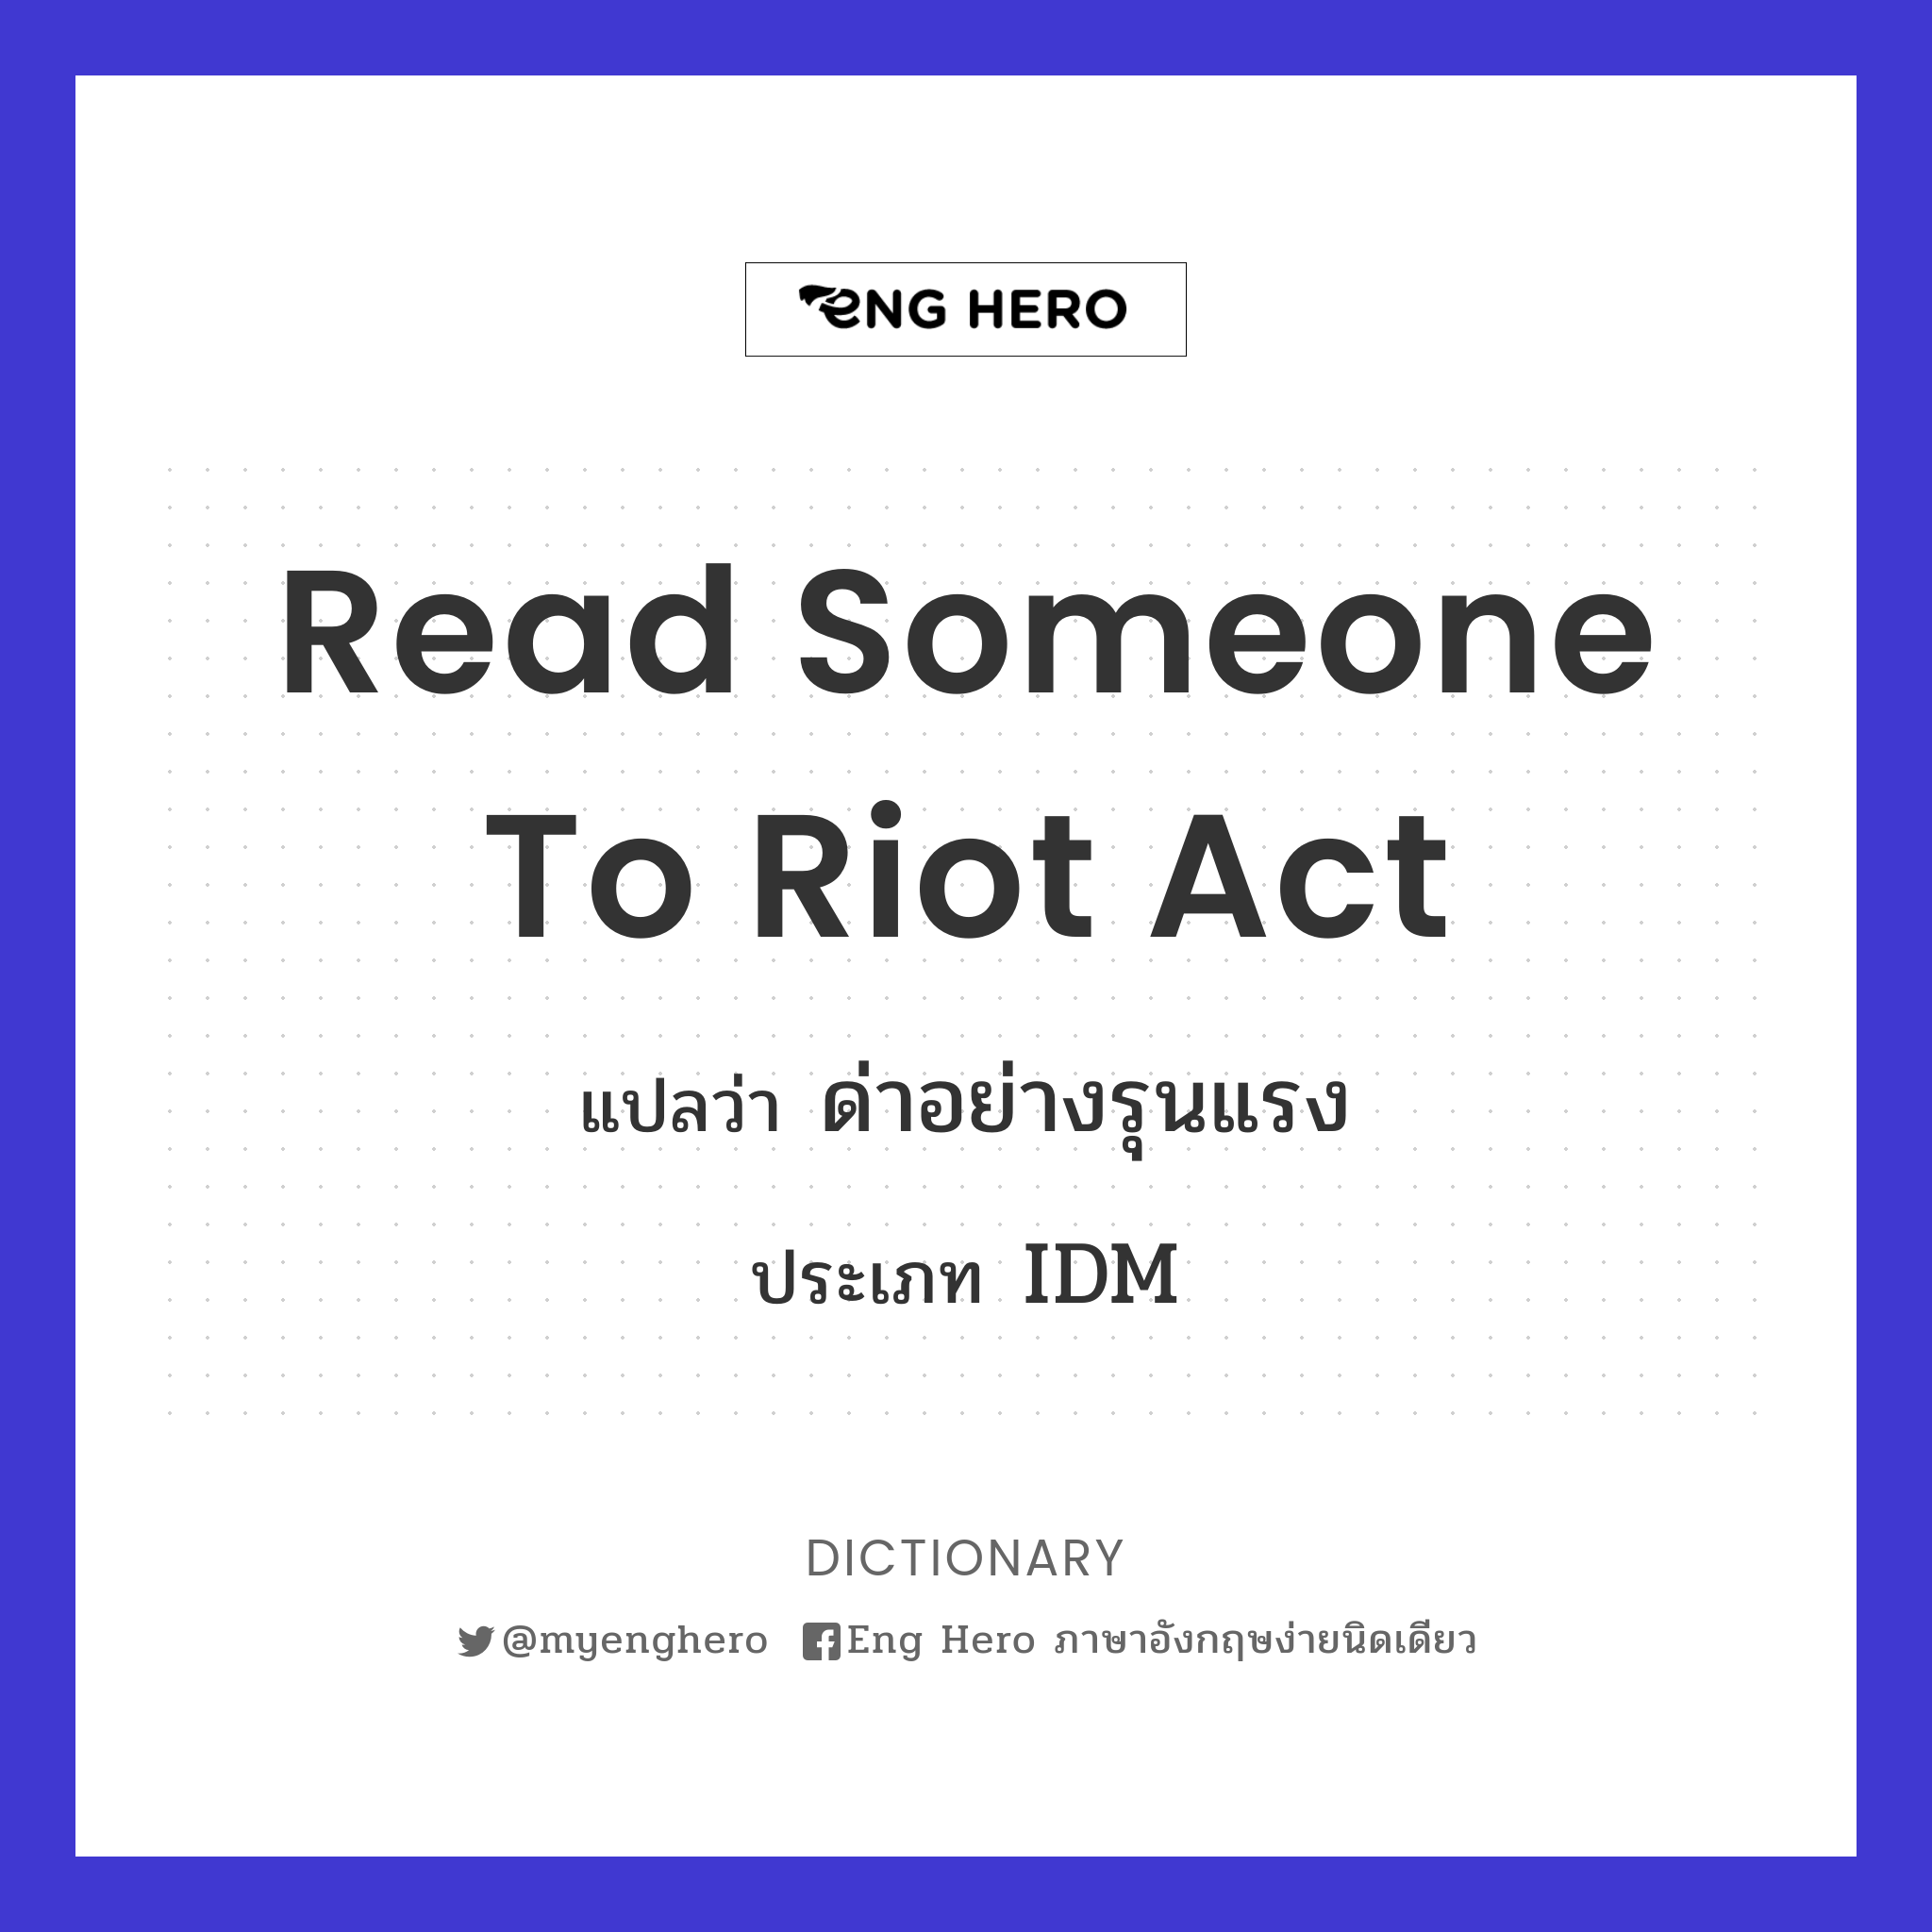 read someone to Riot Act